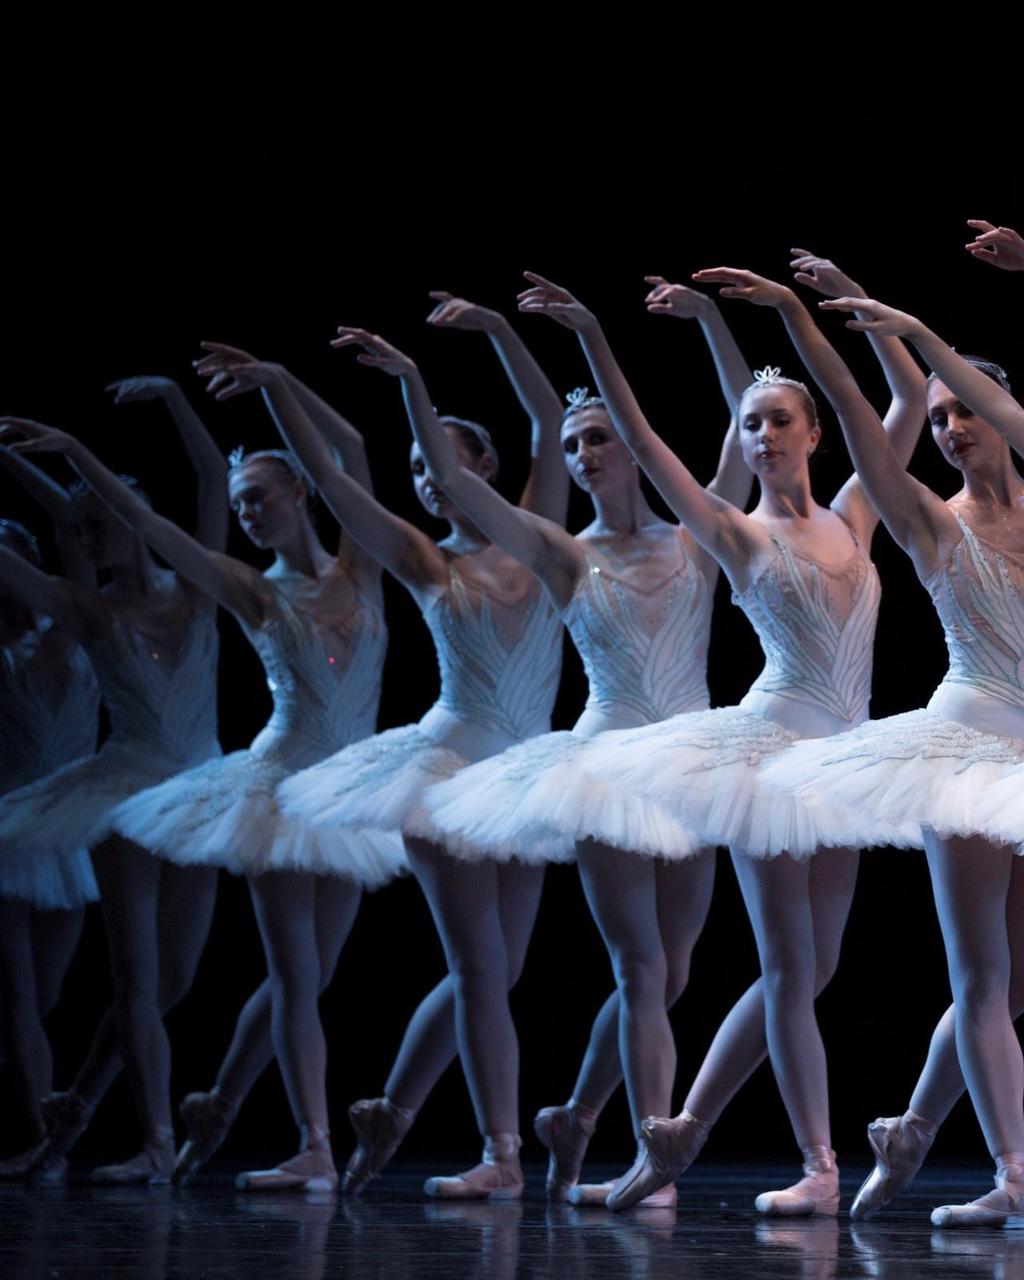 About Swan Lake Swan Lake is considered by many to be the greatest classical ballet of all time.